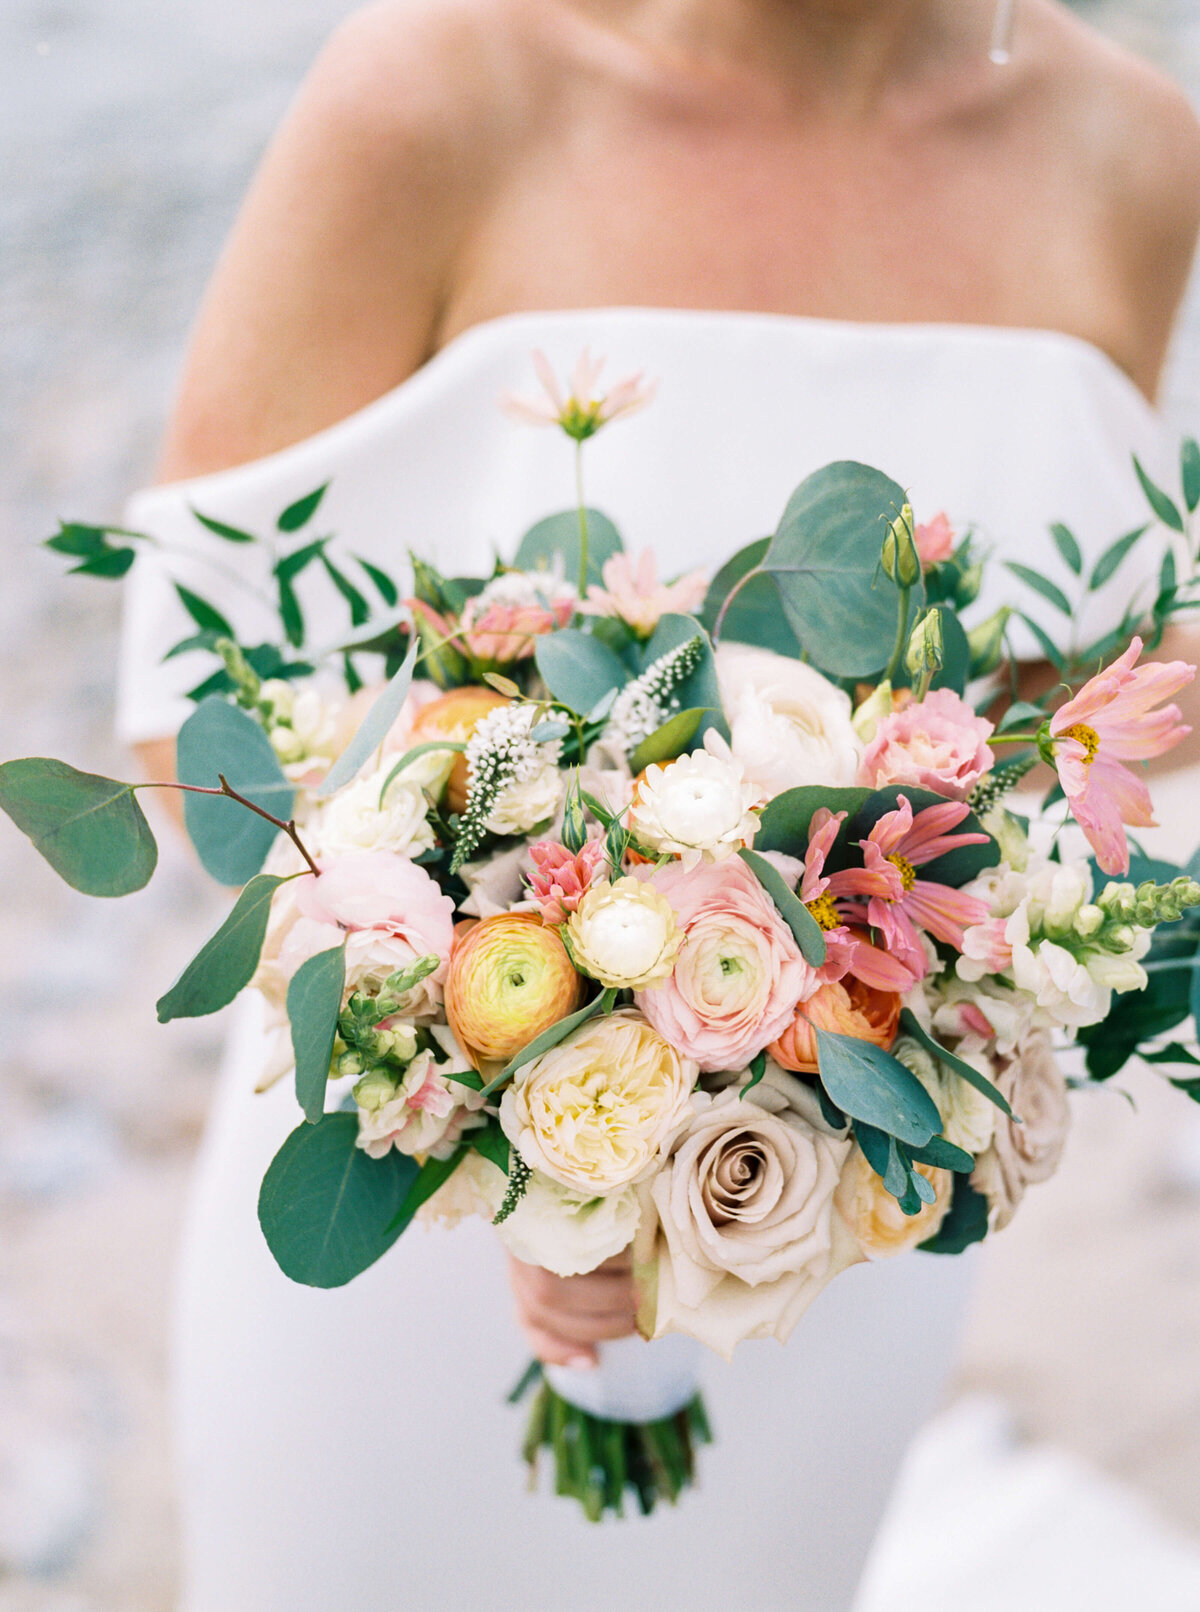 Bride holding colorful bouquet of pinks, yellow and ivory florals